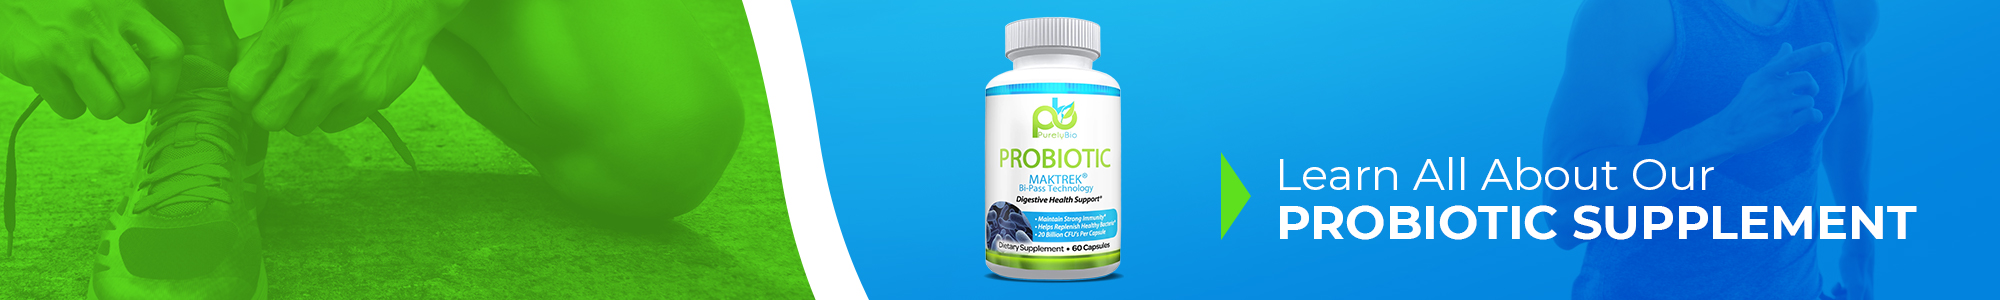 Banner - Learn all about our probiotic supplement